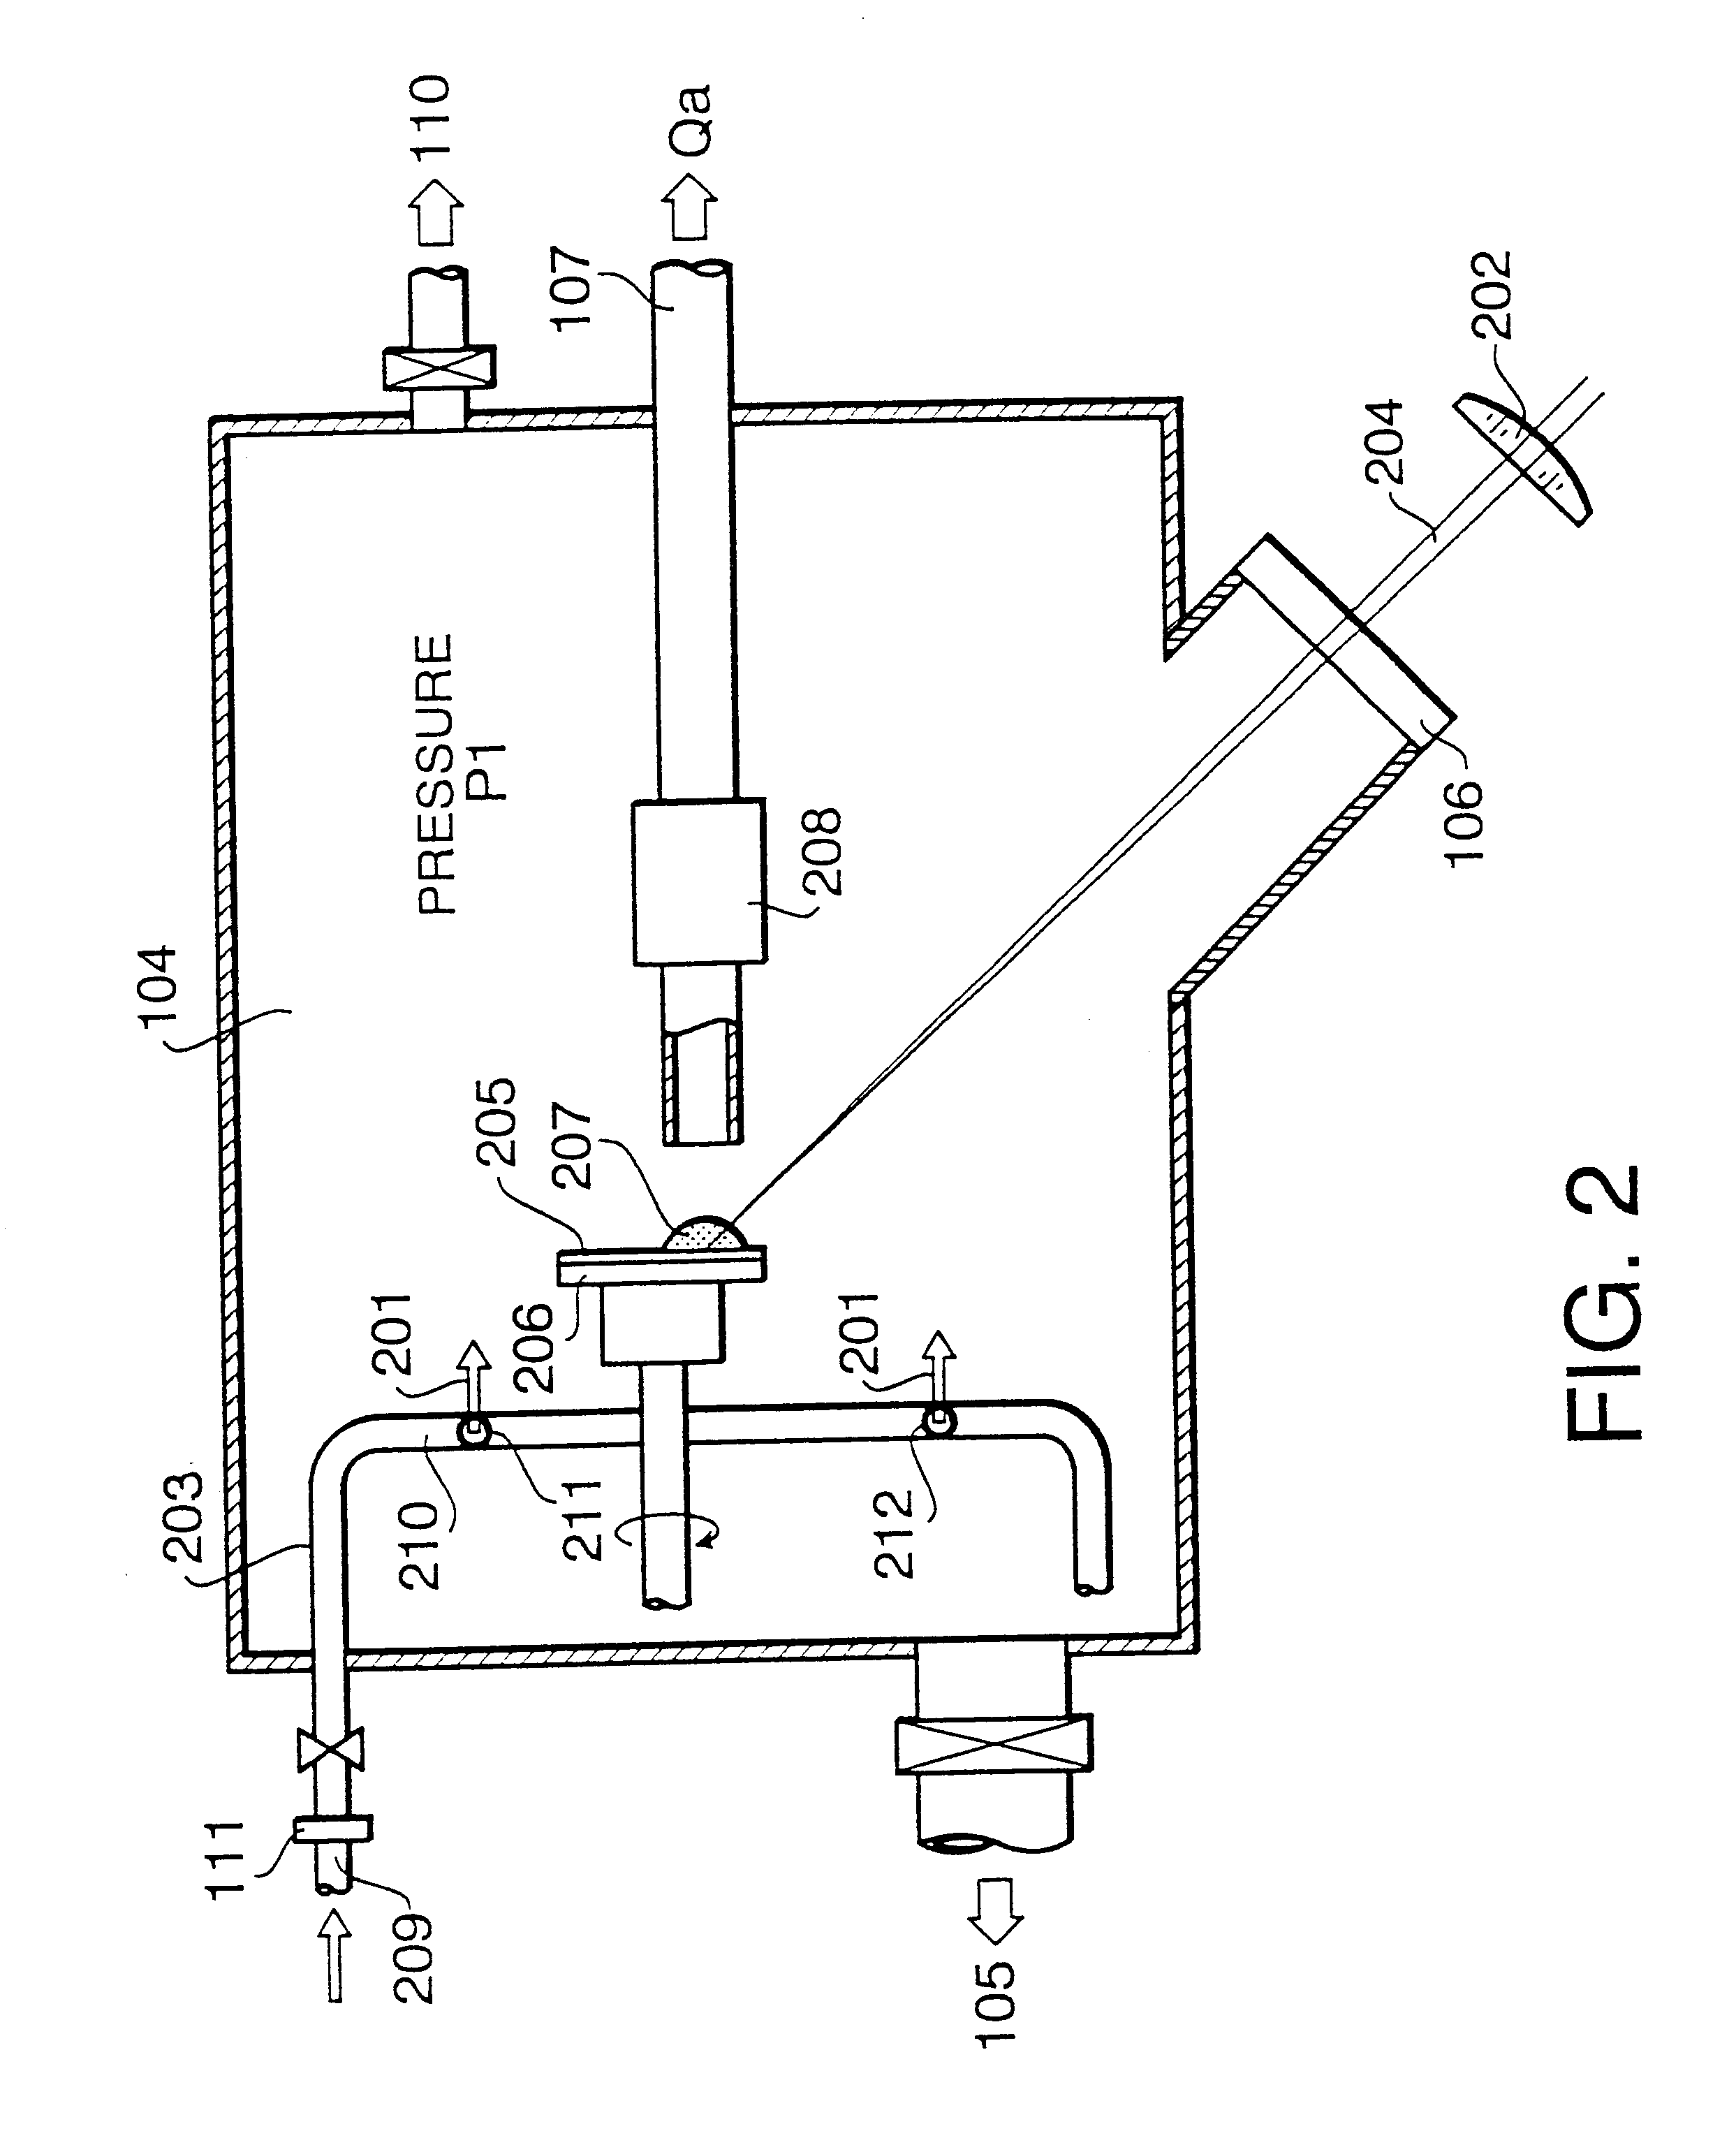 Fine particle classification apparatus and method for classifying aerosol particles in a sheath gas